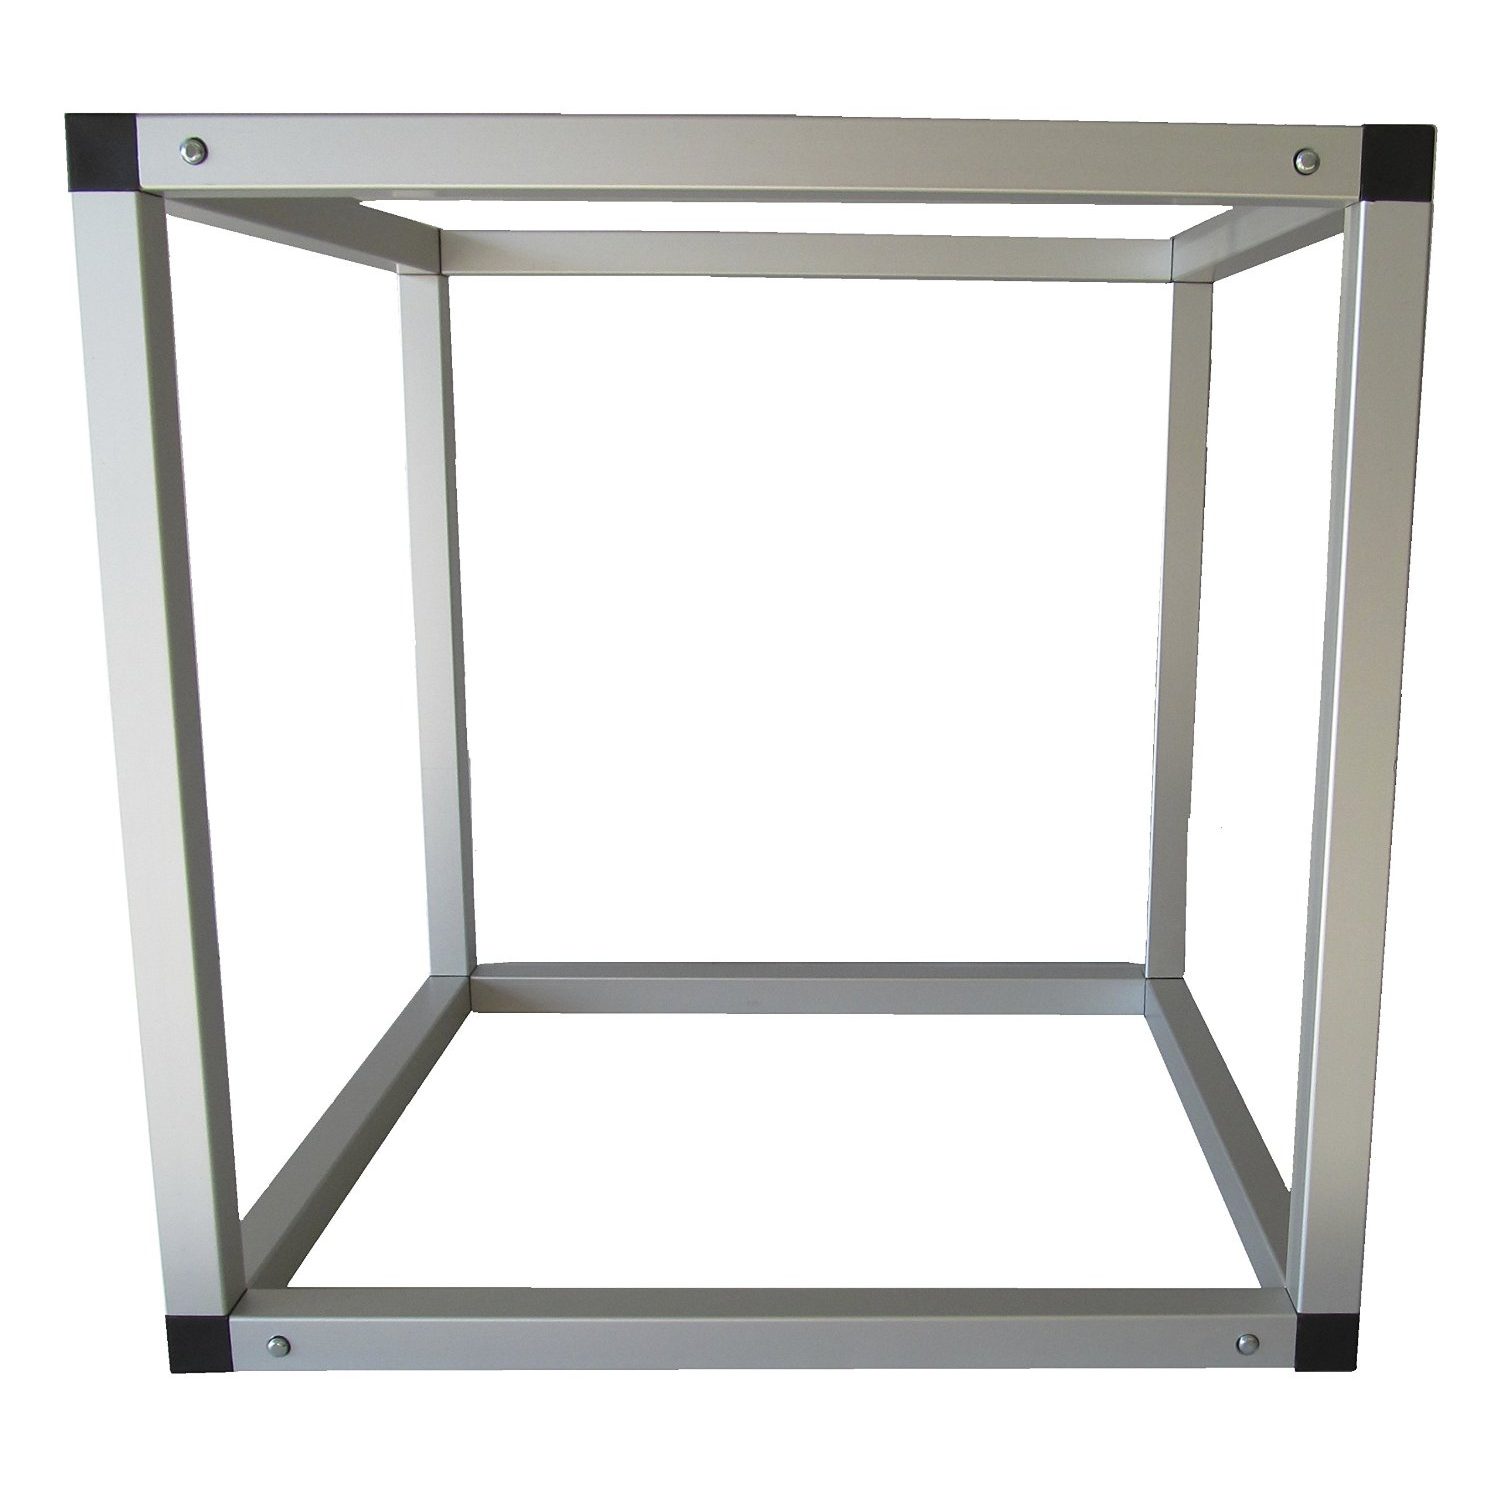 EZTube Modular Framing System Multipurpose Box built using EZTube durable aluminum tubing and quick-release composite connectors. 100-100 Standard Square Extrusion by EZTube 1" Square Tube. 100-100 is a standard square extruded aluminum tube from 6063 T5 aerospace-grade aluminum. 100-100 square extrusion by EZ Tube for boltless construction framing systems.